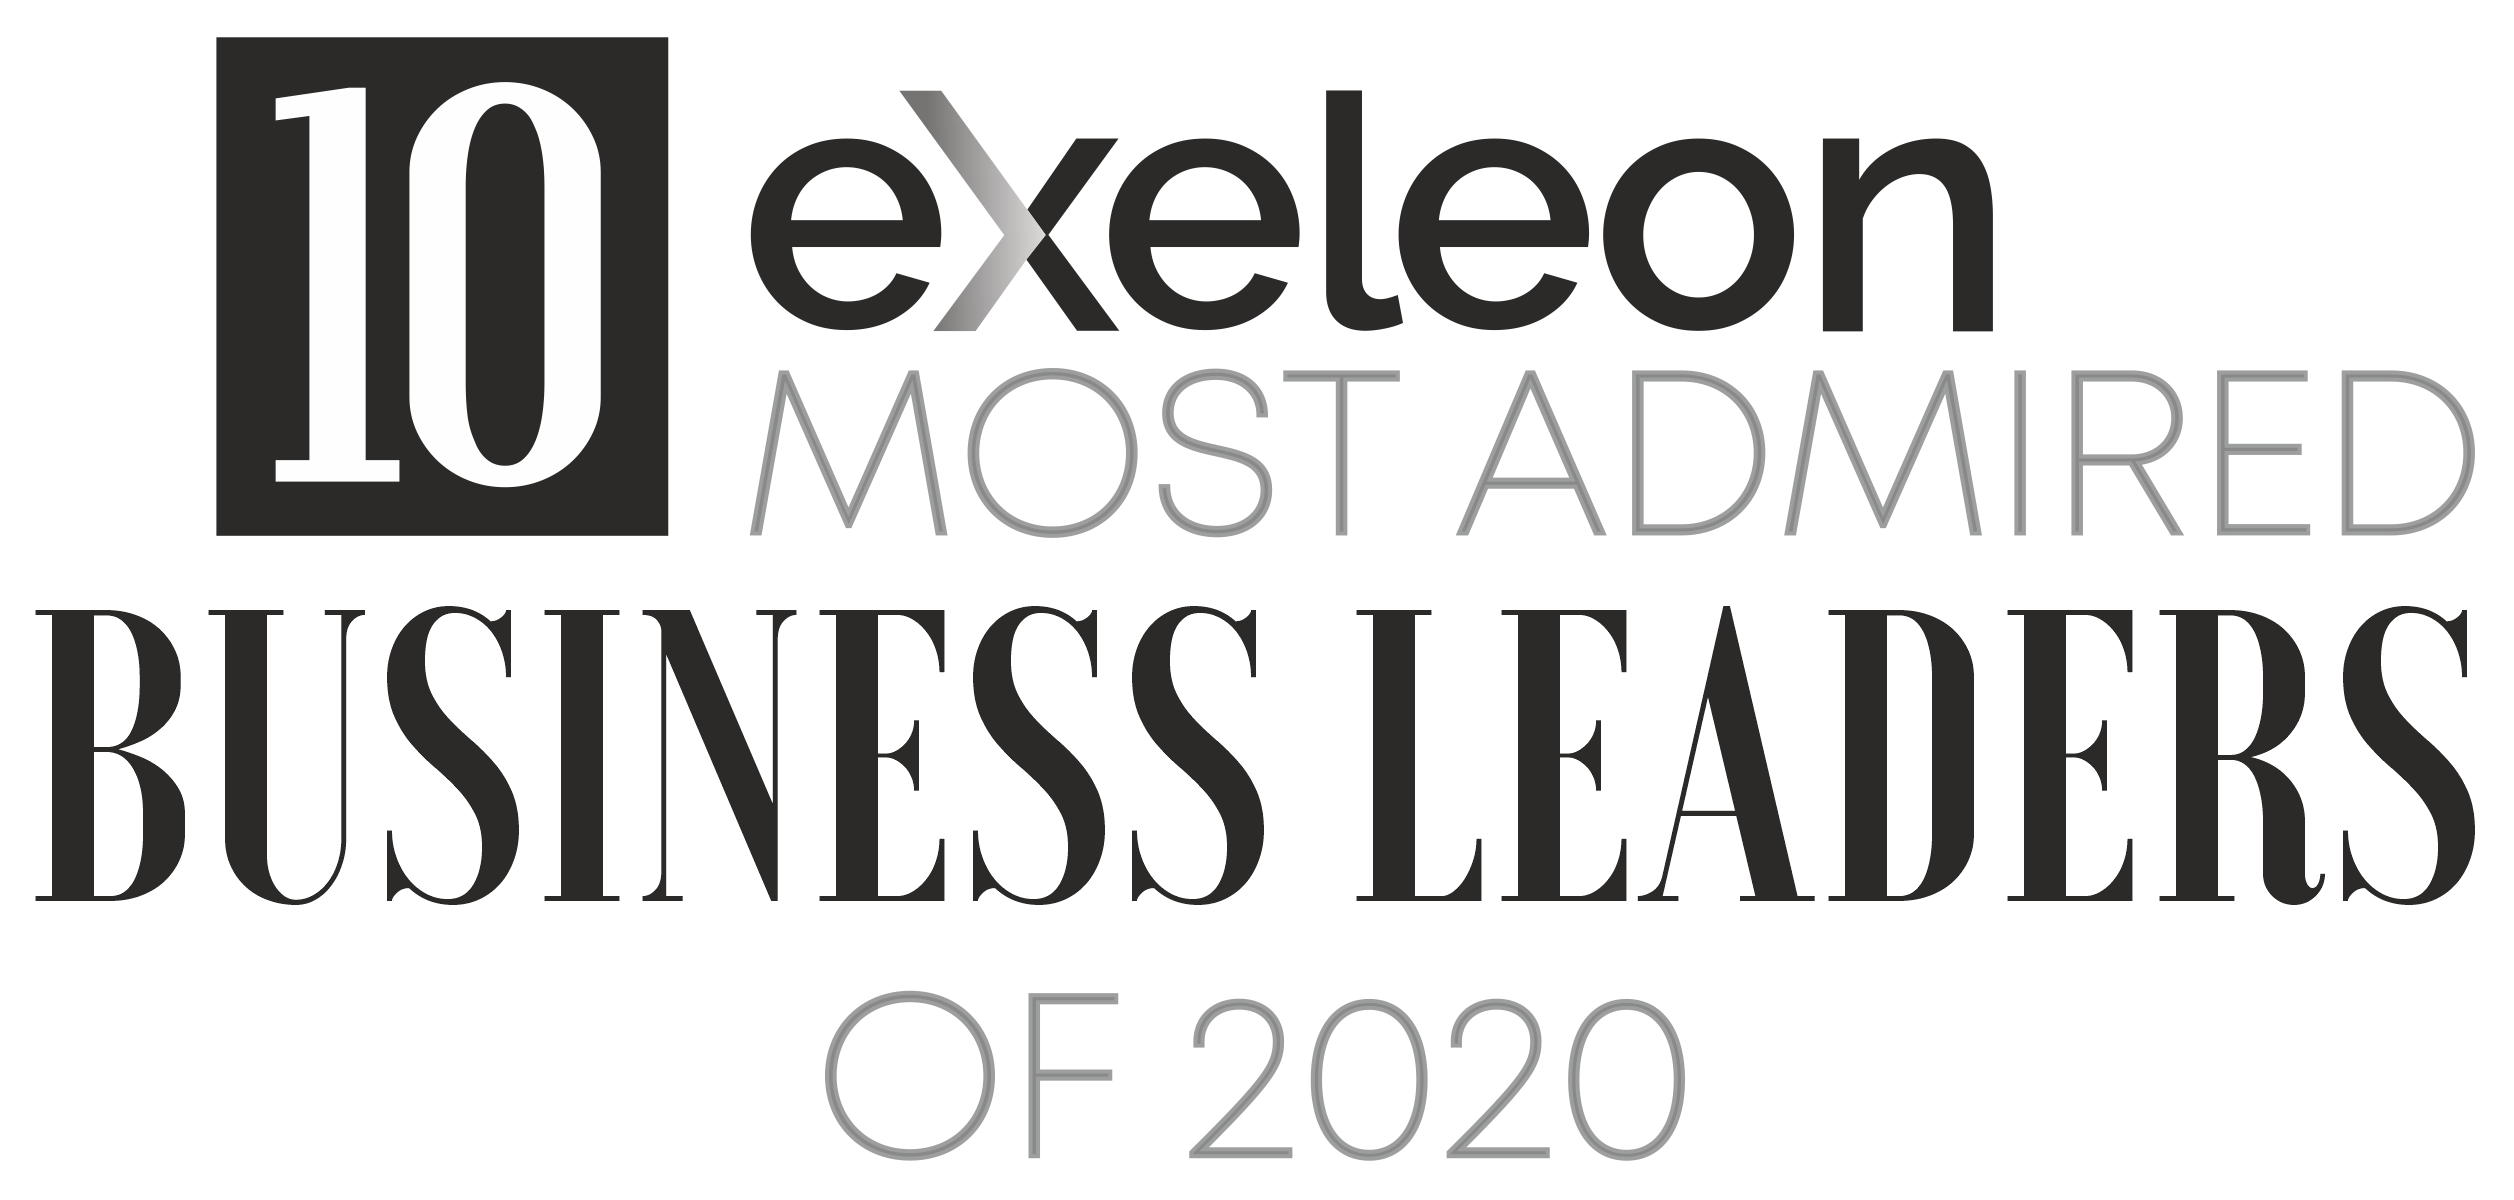 10 most admired business leaders of 2020